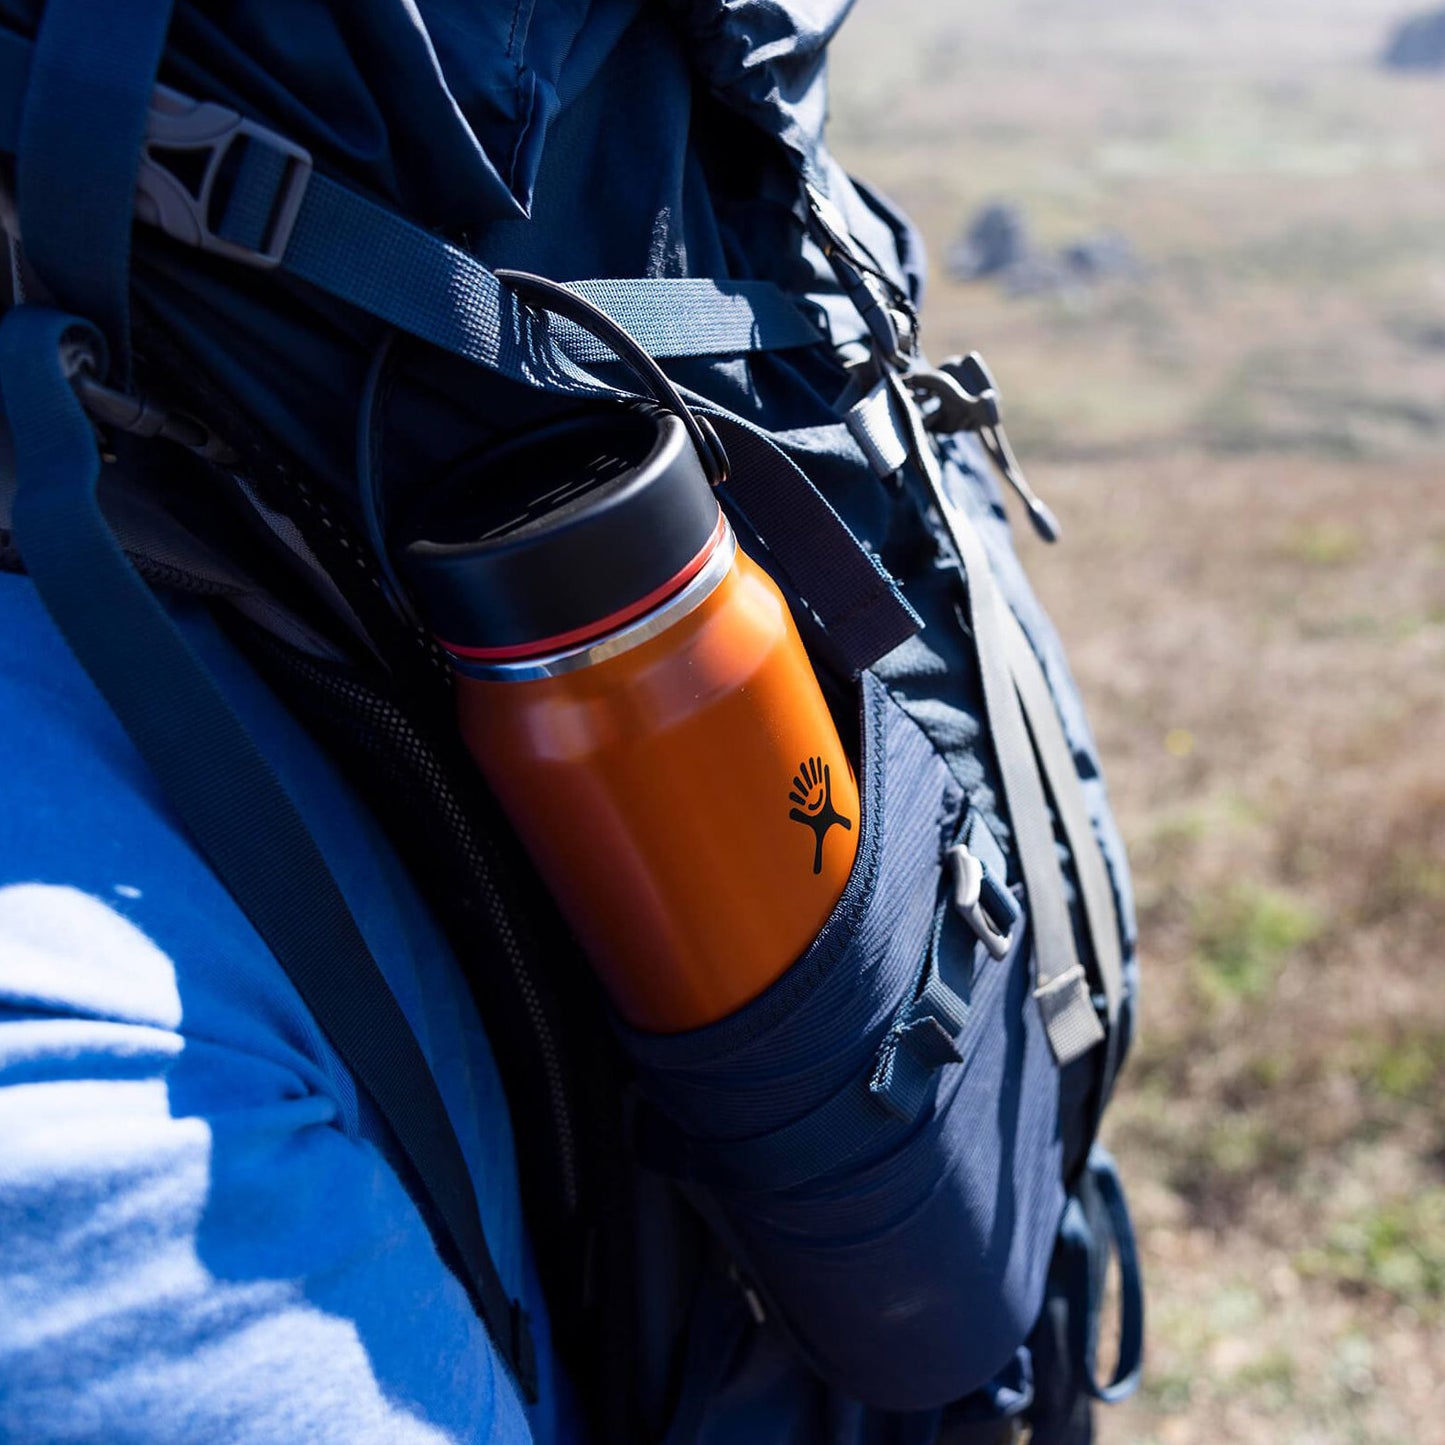 Hydro Flask Lightweight Wide Mouth Trail Series™, 946 ml (32oz)